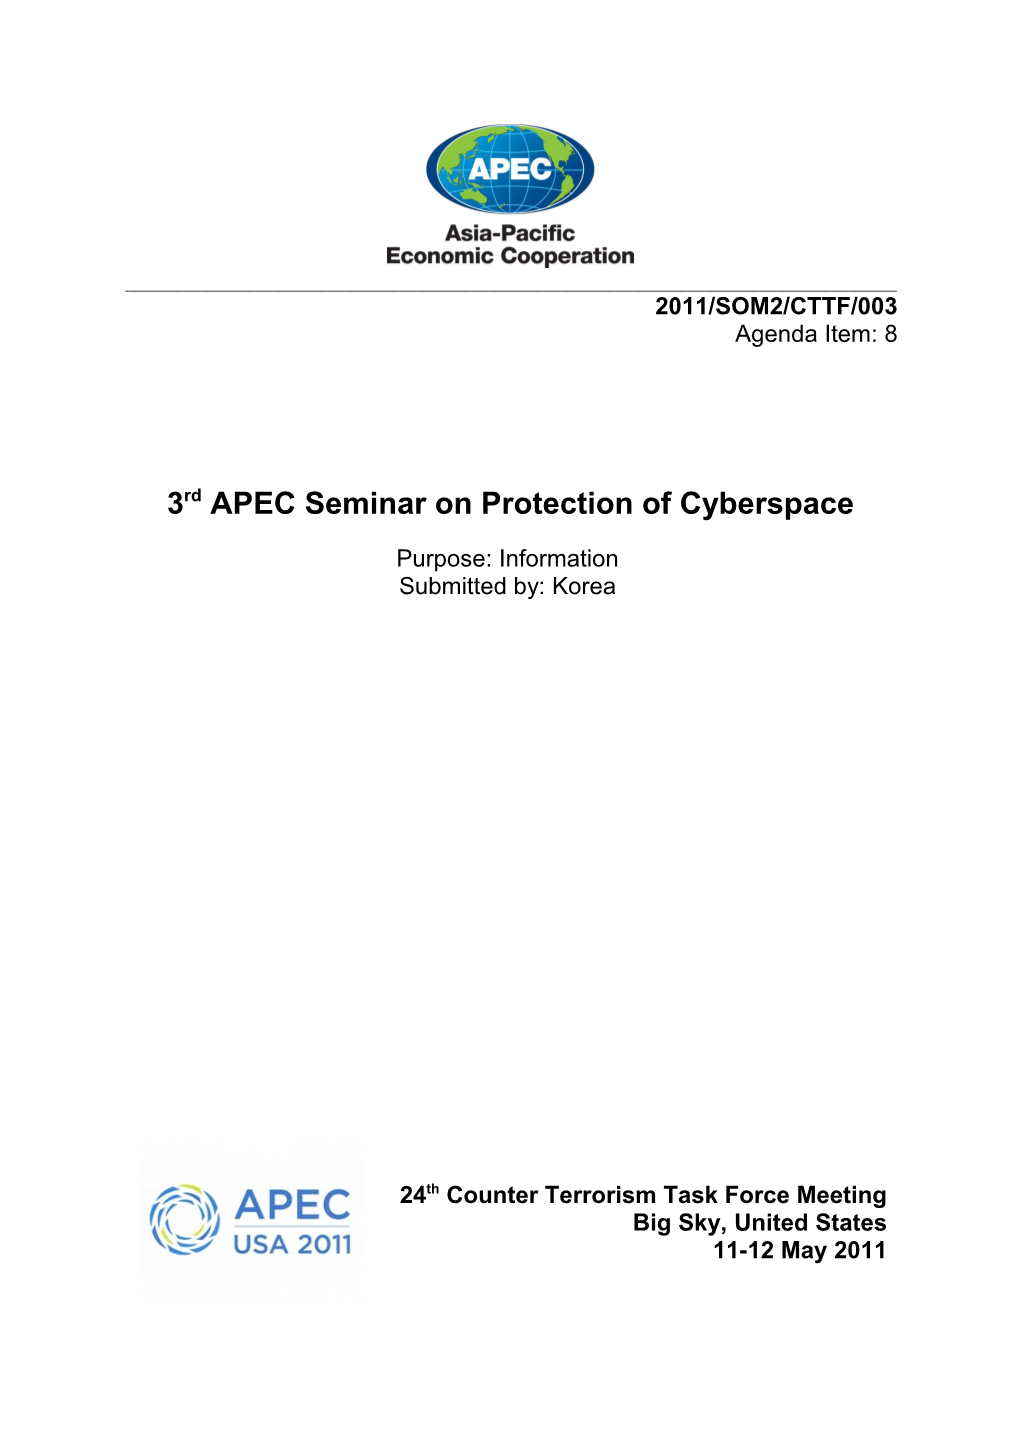 3Rd APEC Seminar on Protection of Cyberspace